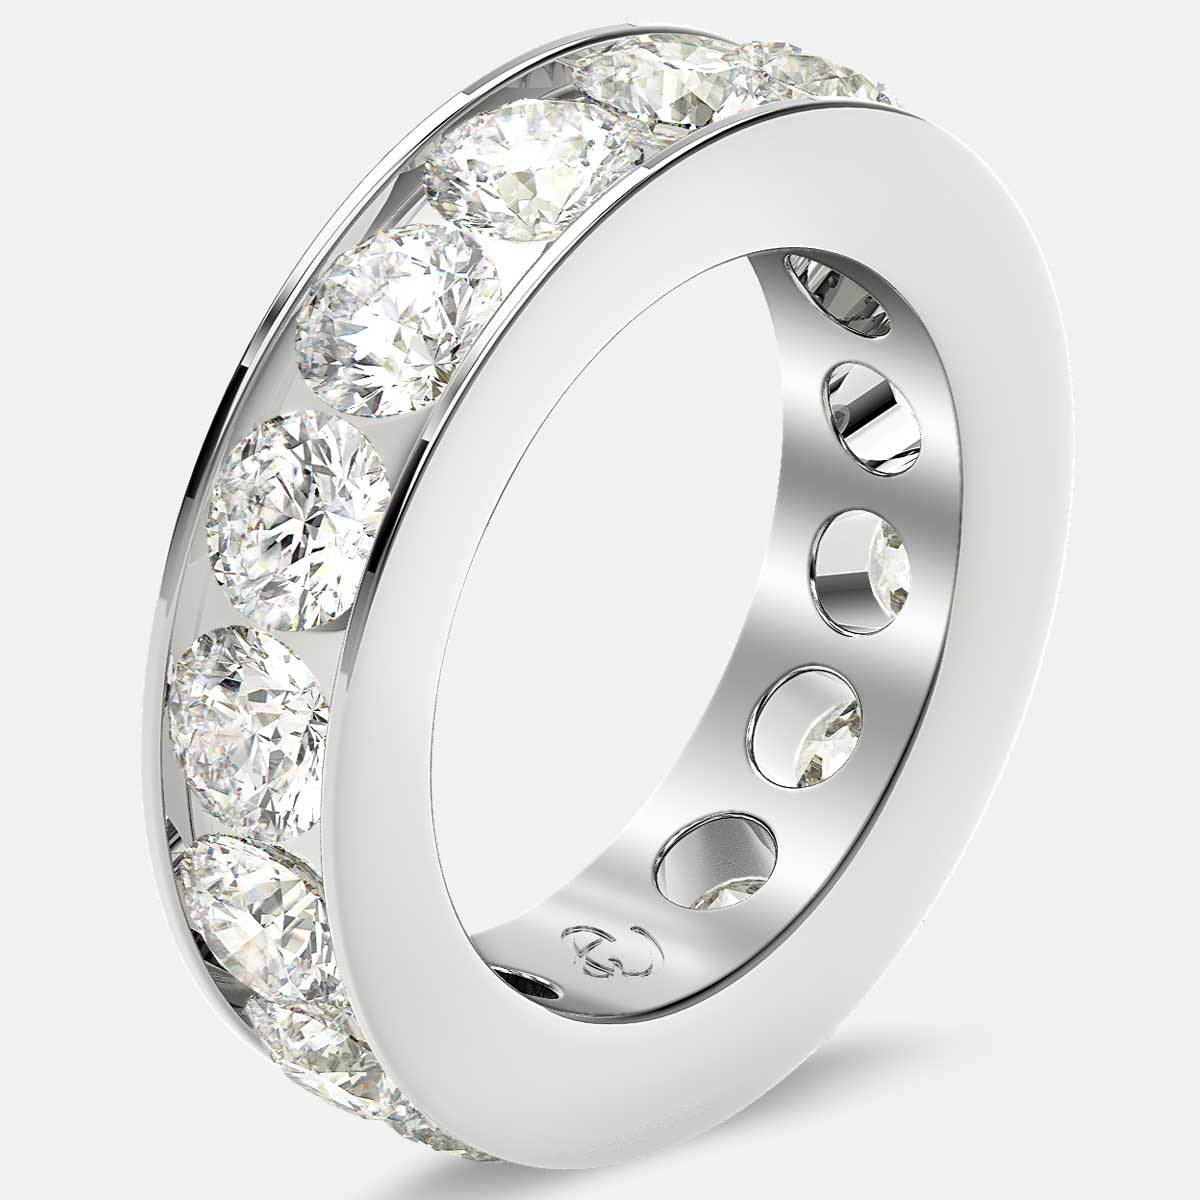 Channel Set Eternity Ring with Round Diamonds in 18k White Gold